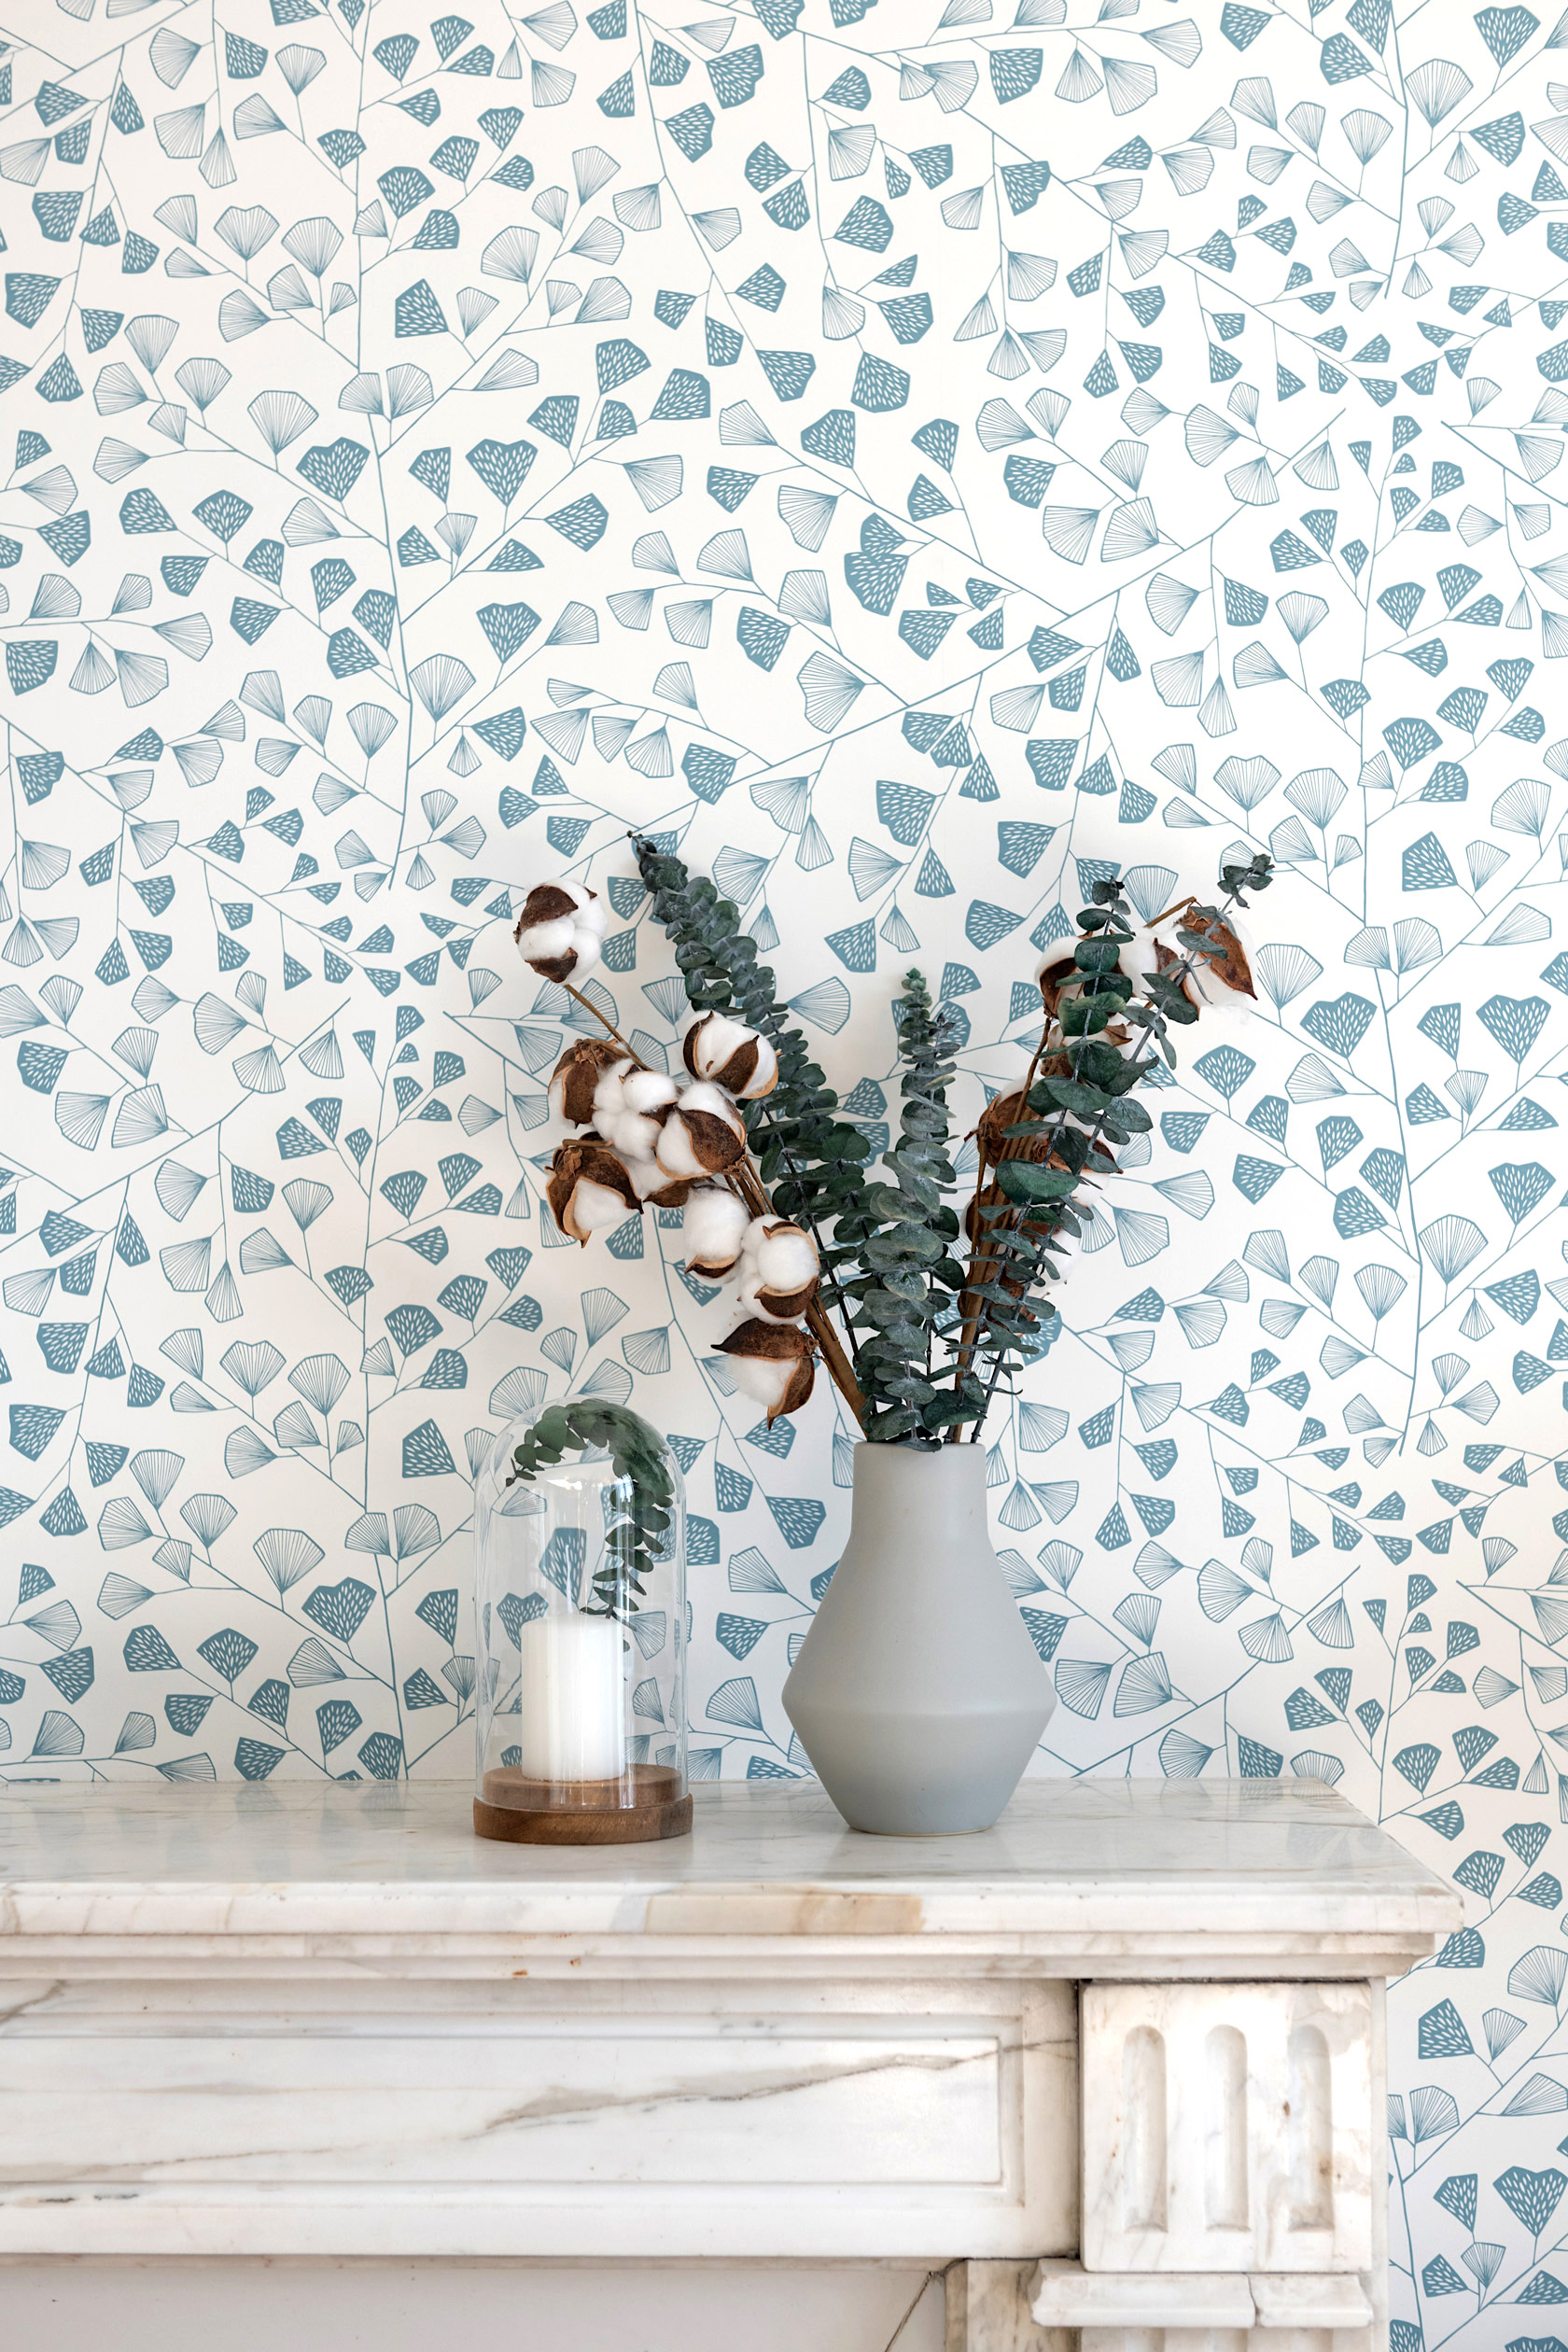 Geestelijk perzik kasteel MissPrint Limited on Twitter: "We love this whimsical scheme by Skea  Designer! Featuring our Fern design in the Lighthouse colourway, this  kaleidoscopic print is the ideal choice for those looking to introduce